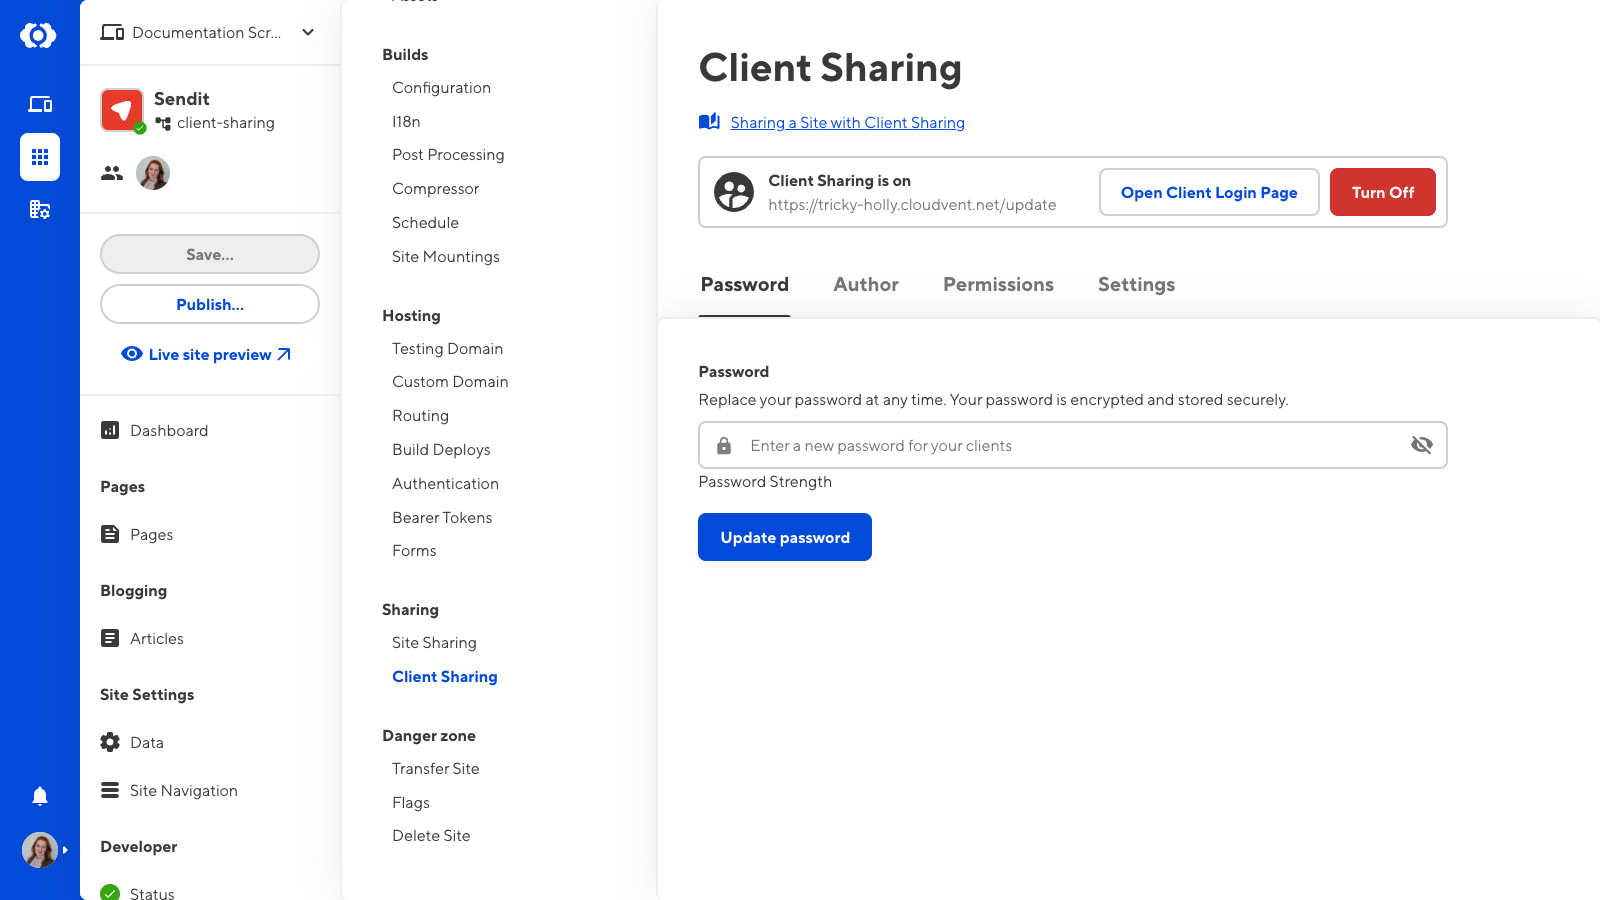 A screenshot of the Password tab on the Client Sharing page shows a field to reset the Client password and a button to disable Client Sharing.